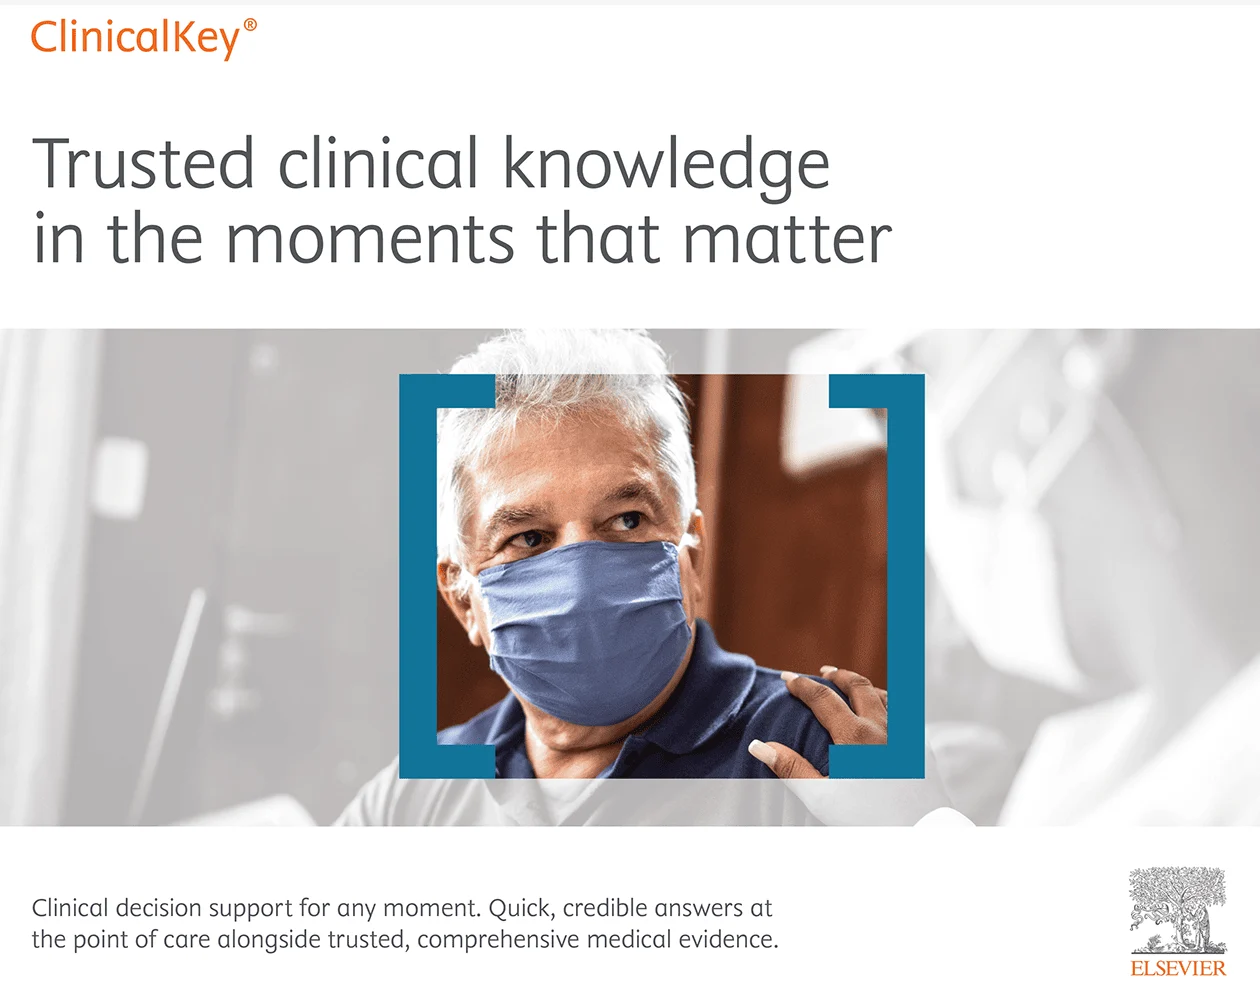 Cover of ebook - Trusted clinical knowledge in the moments that matter